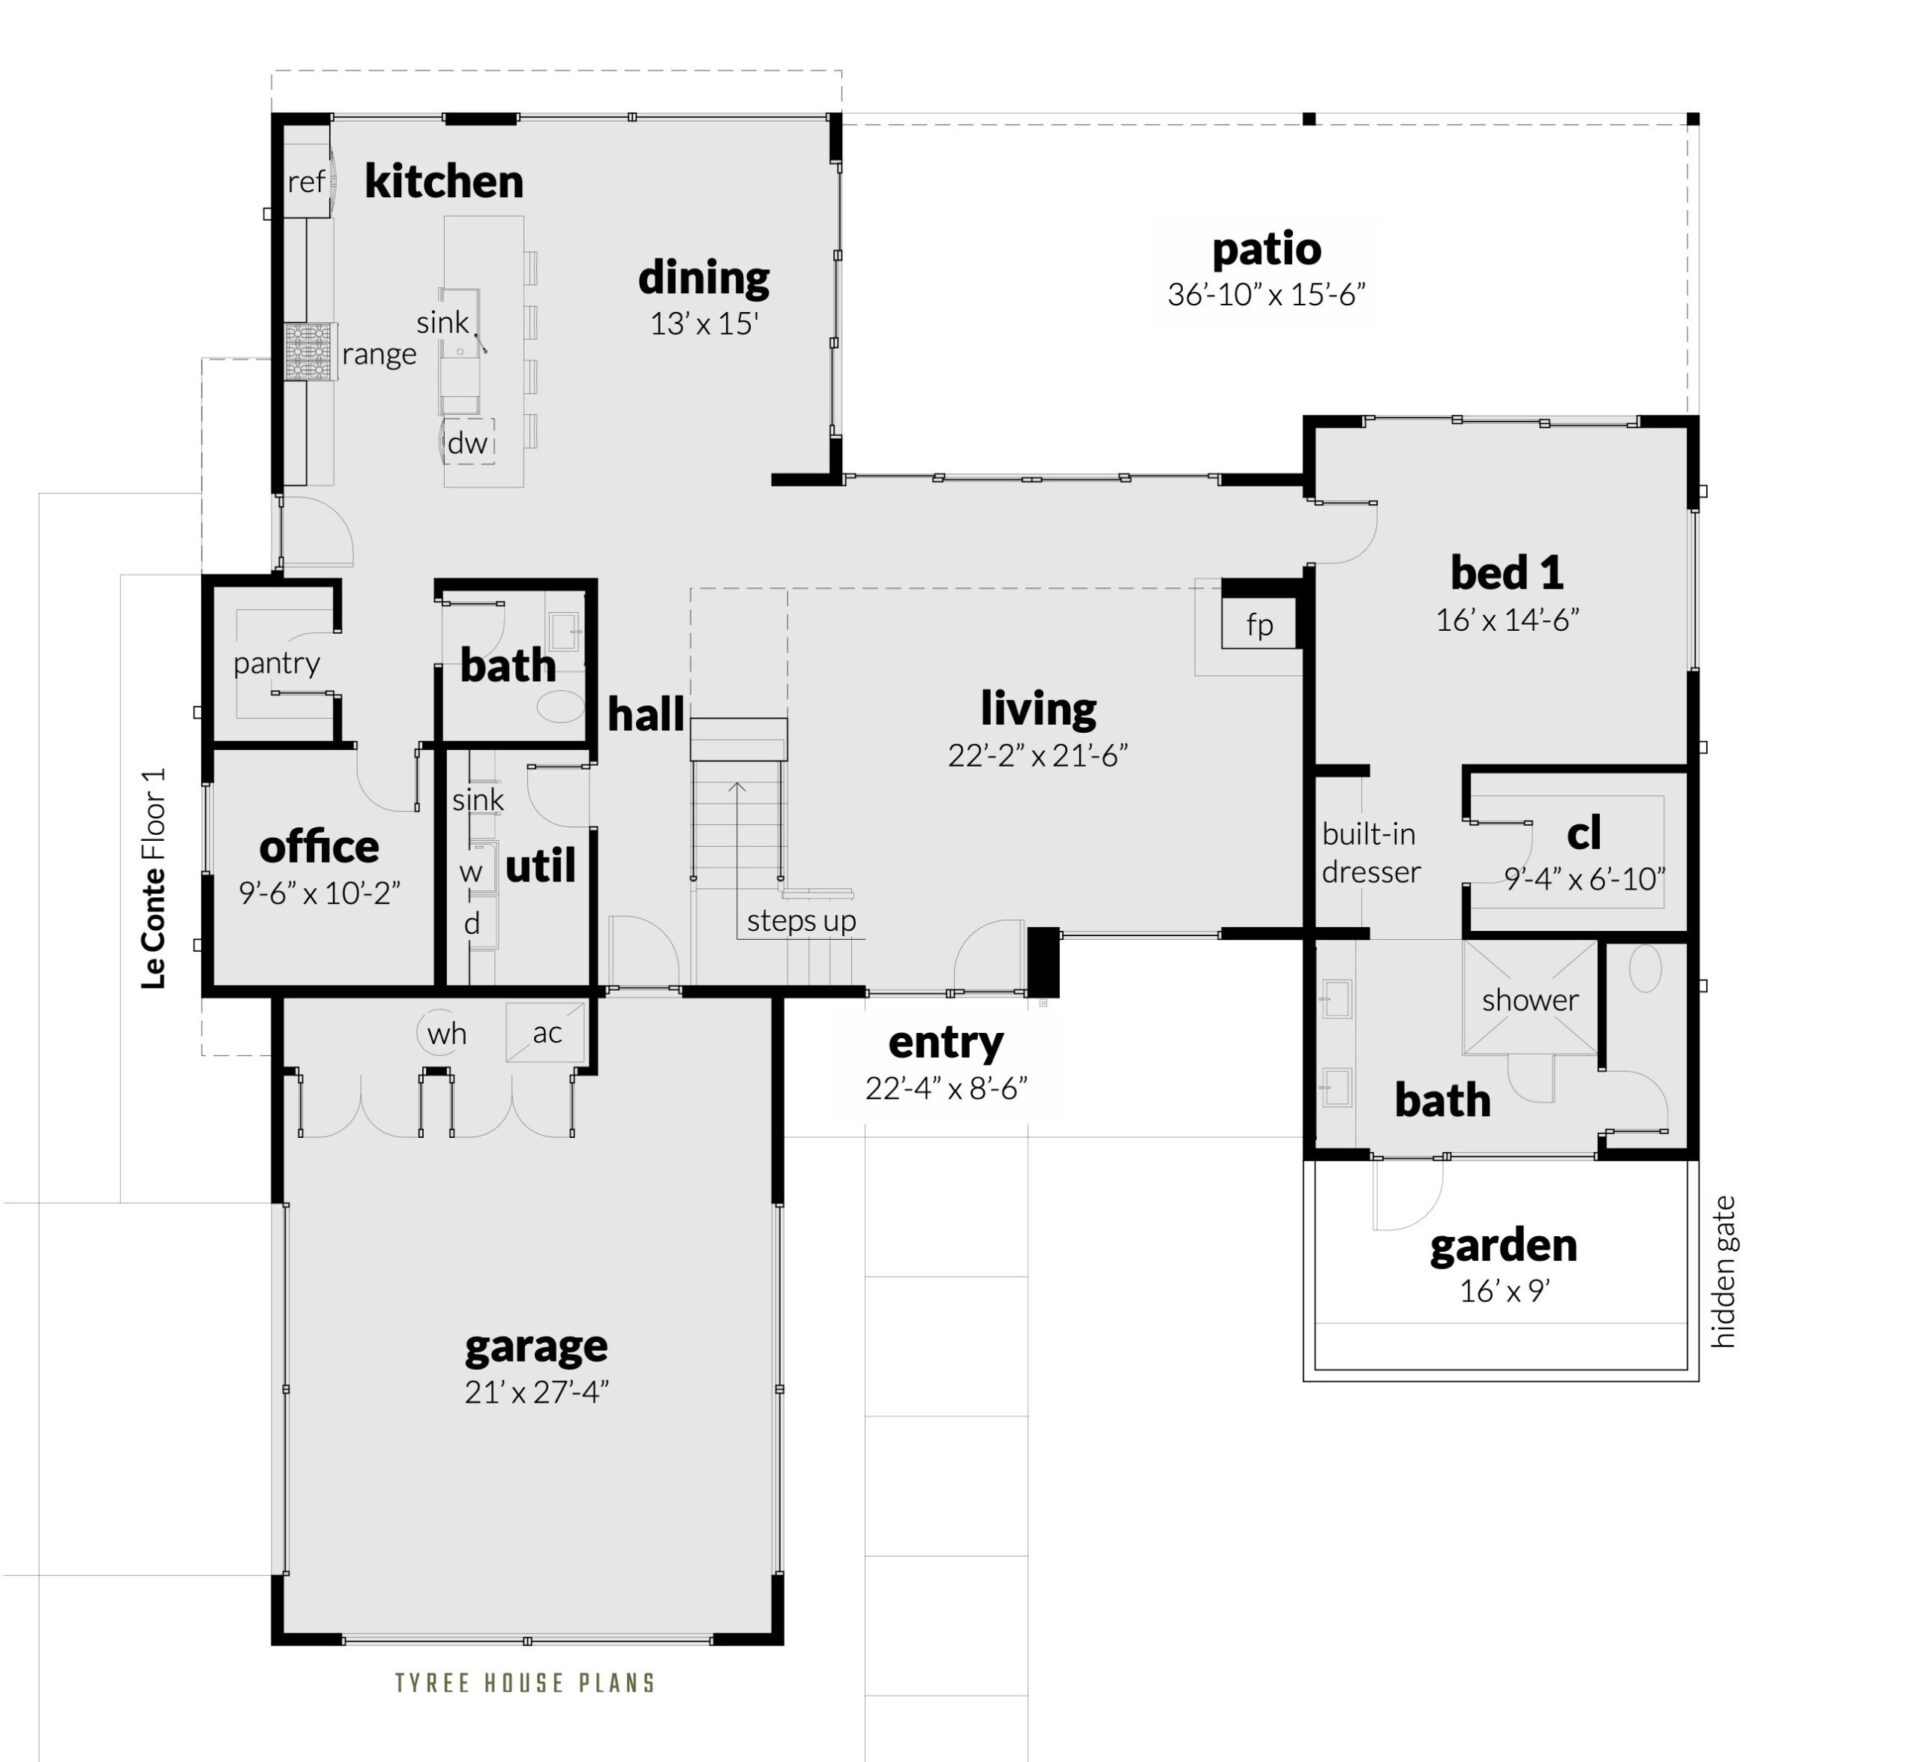 4 Bedroom Modern House with Home Office. Tyree House Plans.